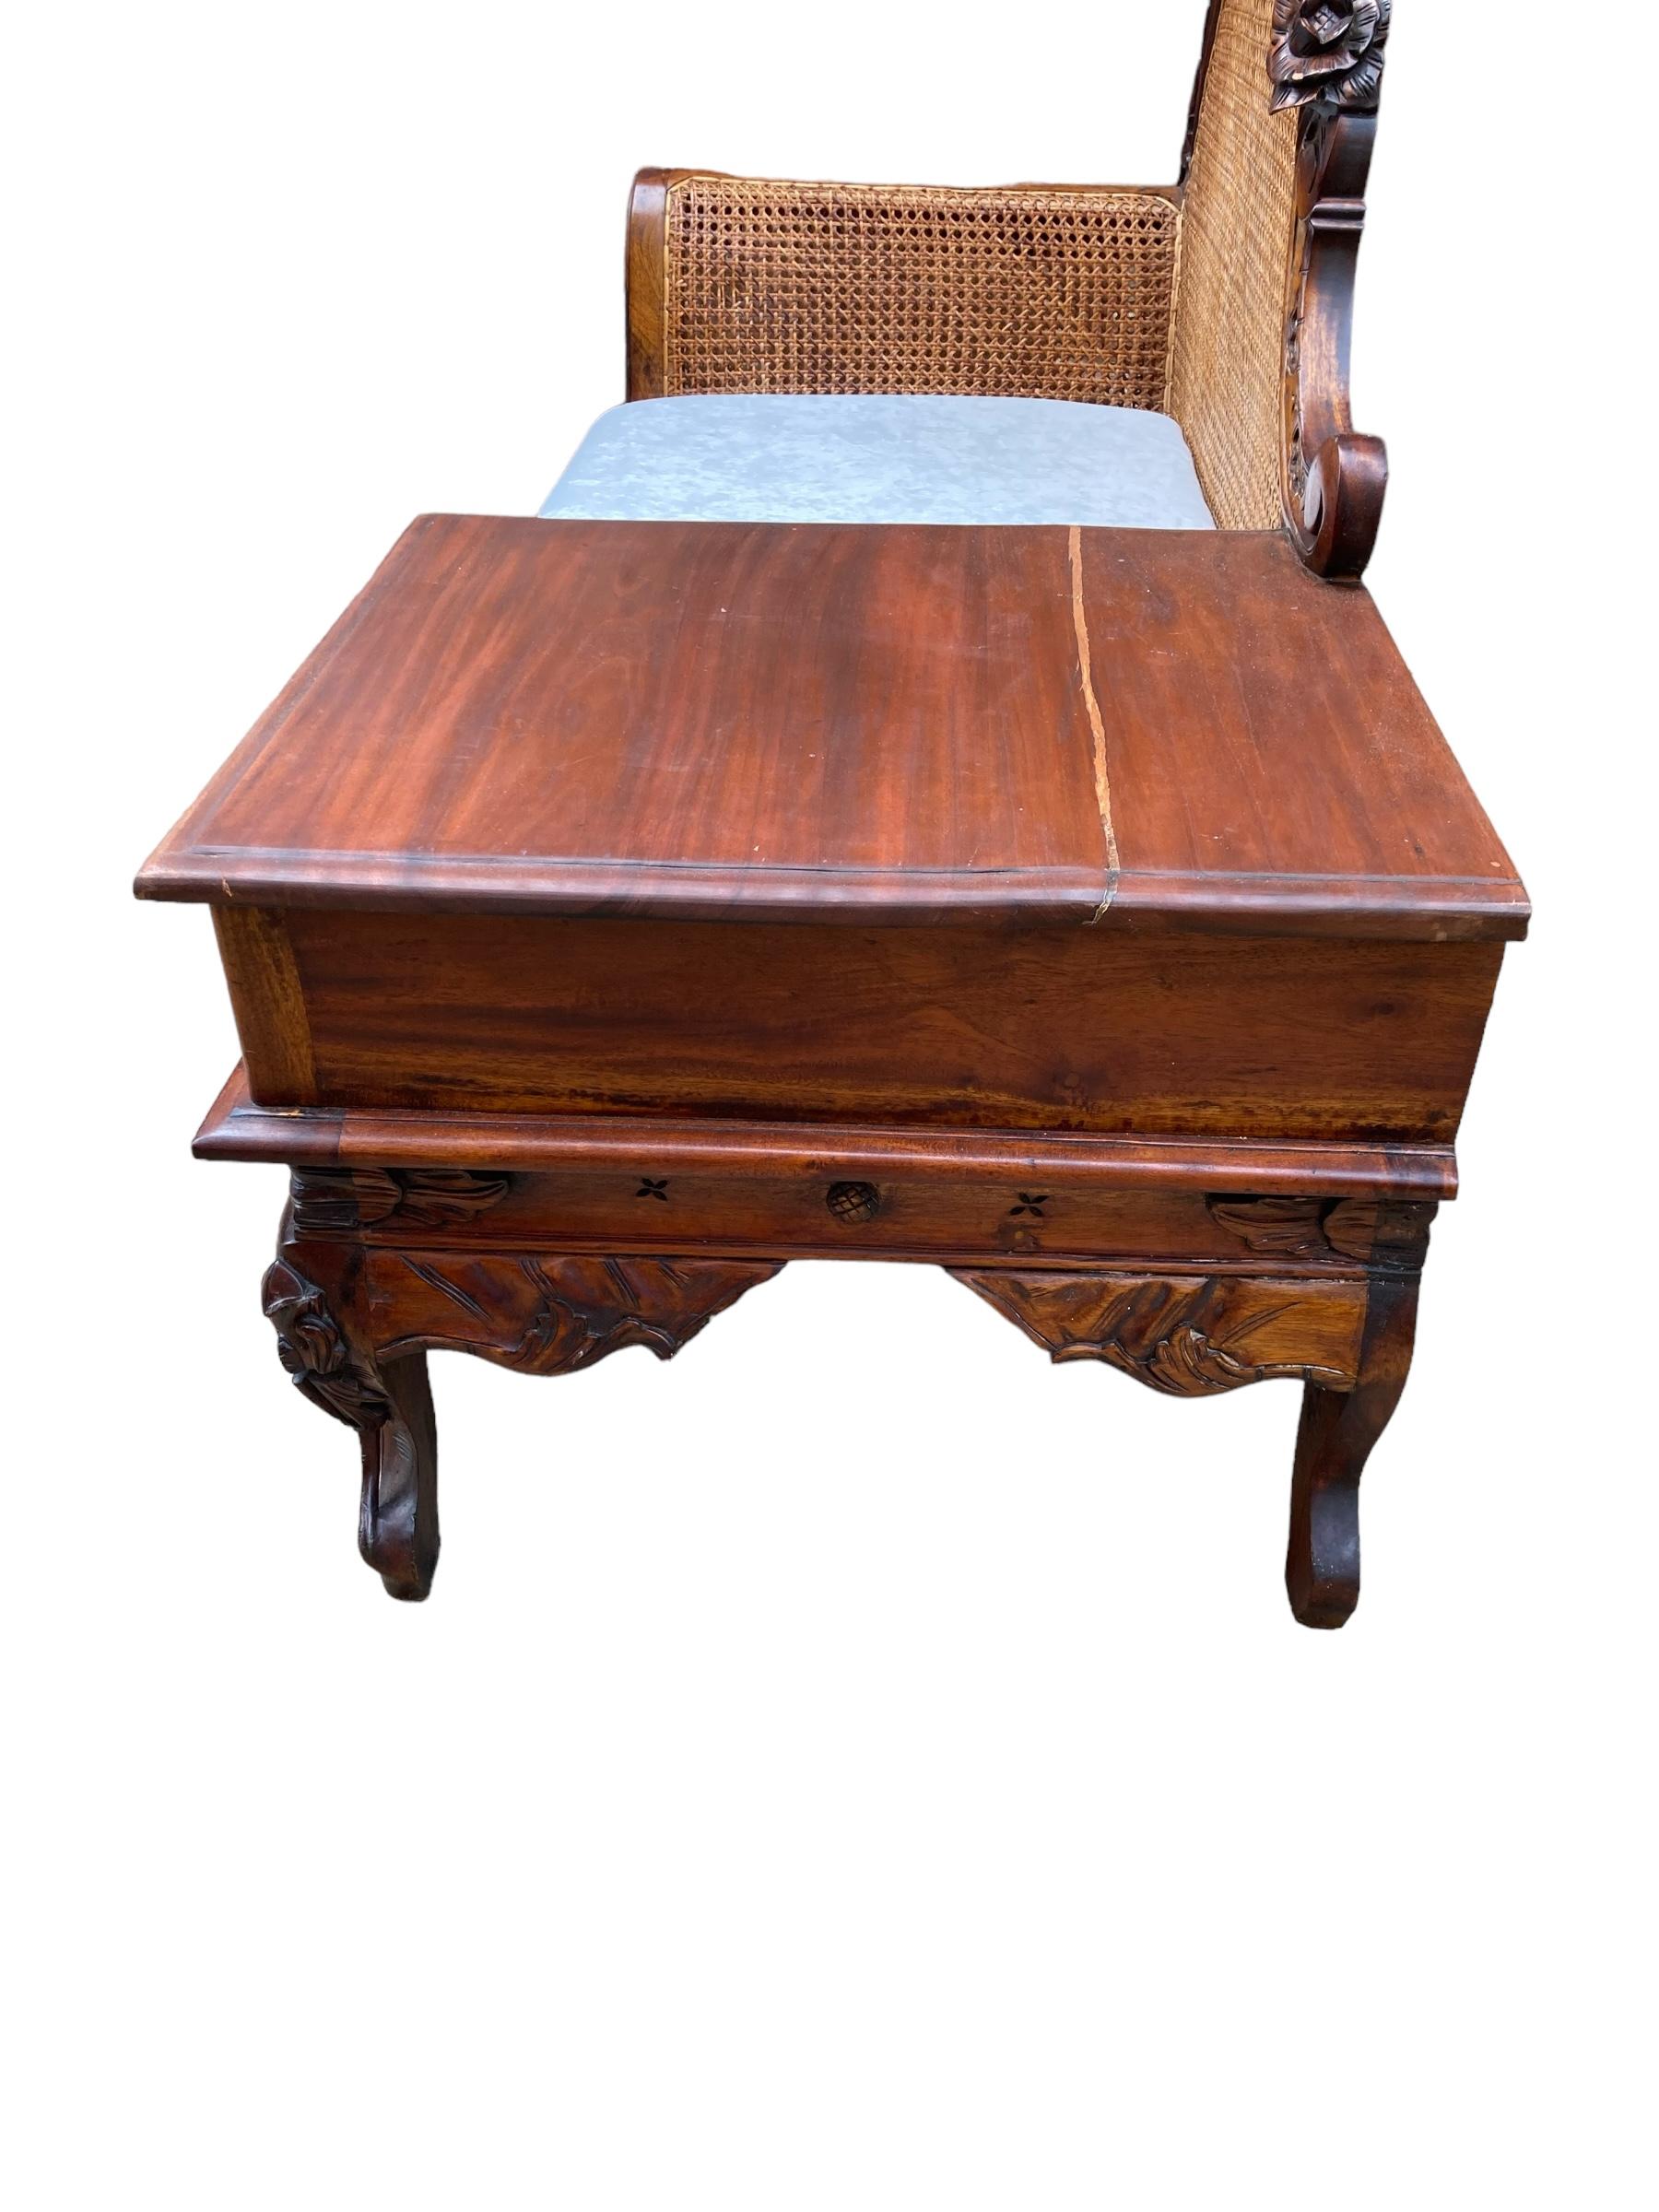 Original Hand Carved Mahogany Victorian Telephone or Gossip Bench, Bergere  For Sale 4